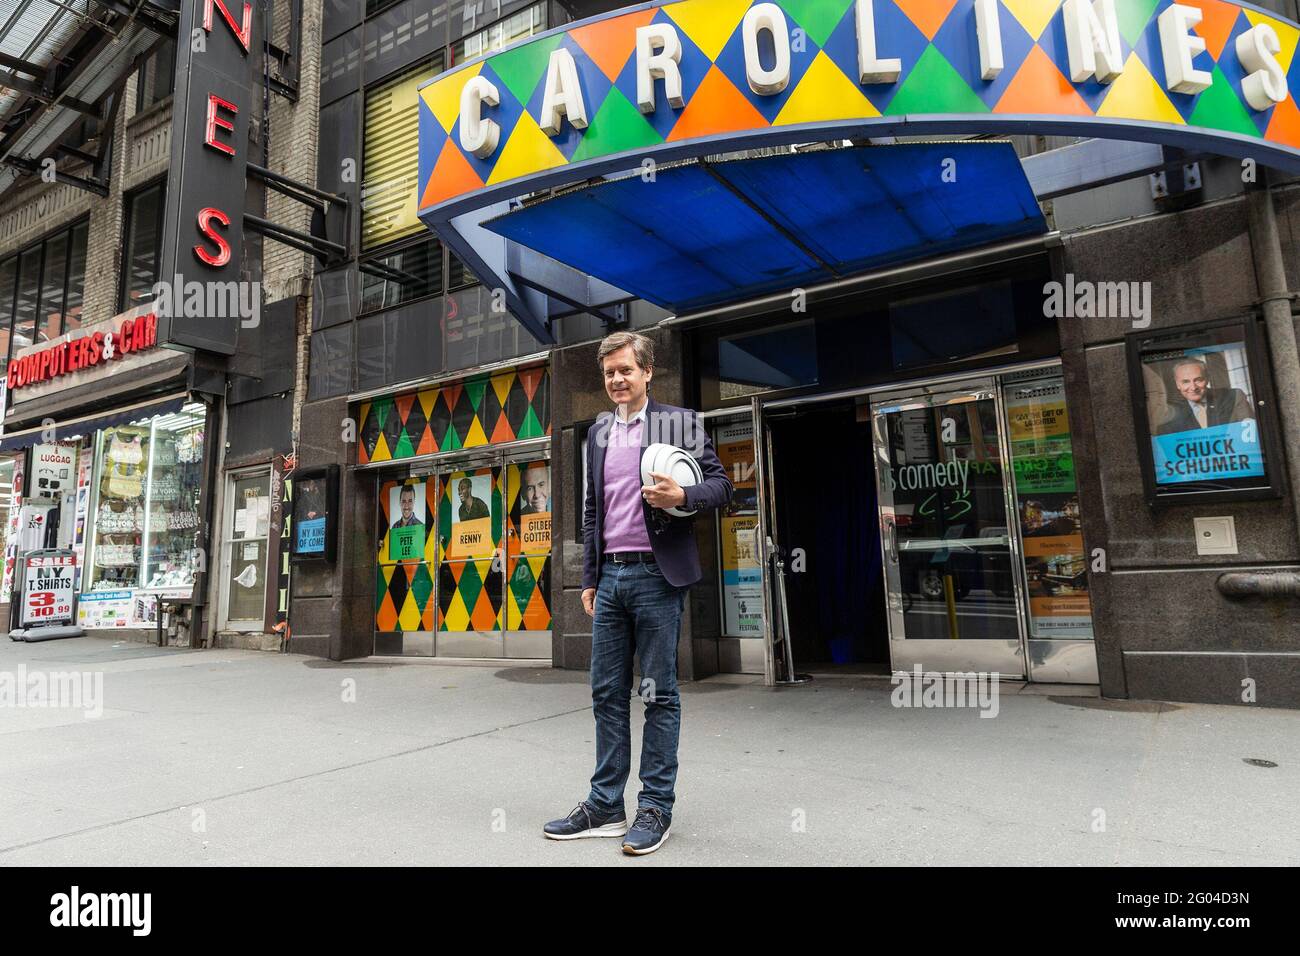 New York, United States. 31st May, 2021. State Senator Brad Hoylman arrives for Carolines on Broadway comedy club re-opening after pandemic ceremony. Senator Charles Schumer lauded Safe our Stages (SOS) bill passed by Senate to help cultural venues to survive pandemic. He also cracked few jokes saying it is comedy club he does not have a choice but say them. (Photo by Lev Radin/Pacific Press) Credit: Pacific Press Media Production Corp./Alamy Live News Stock Photo